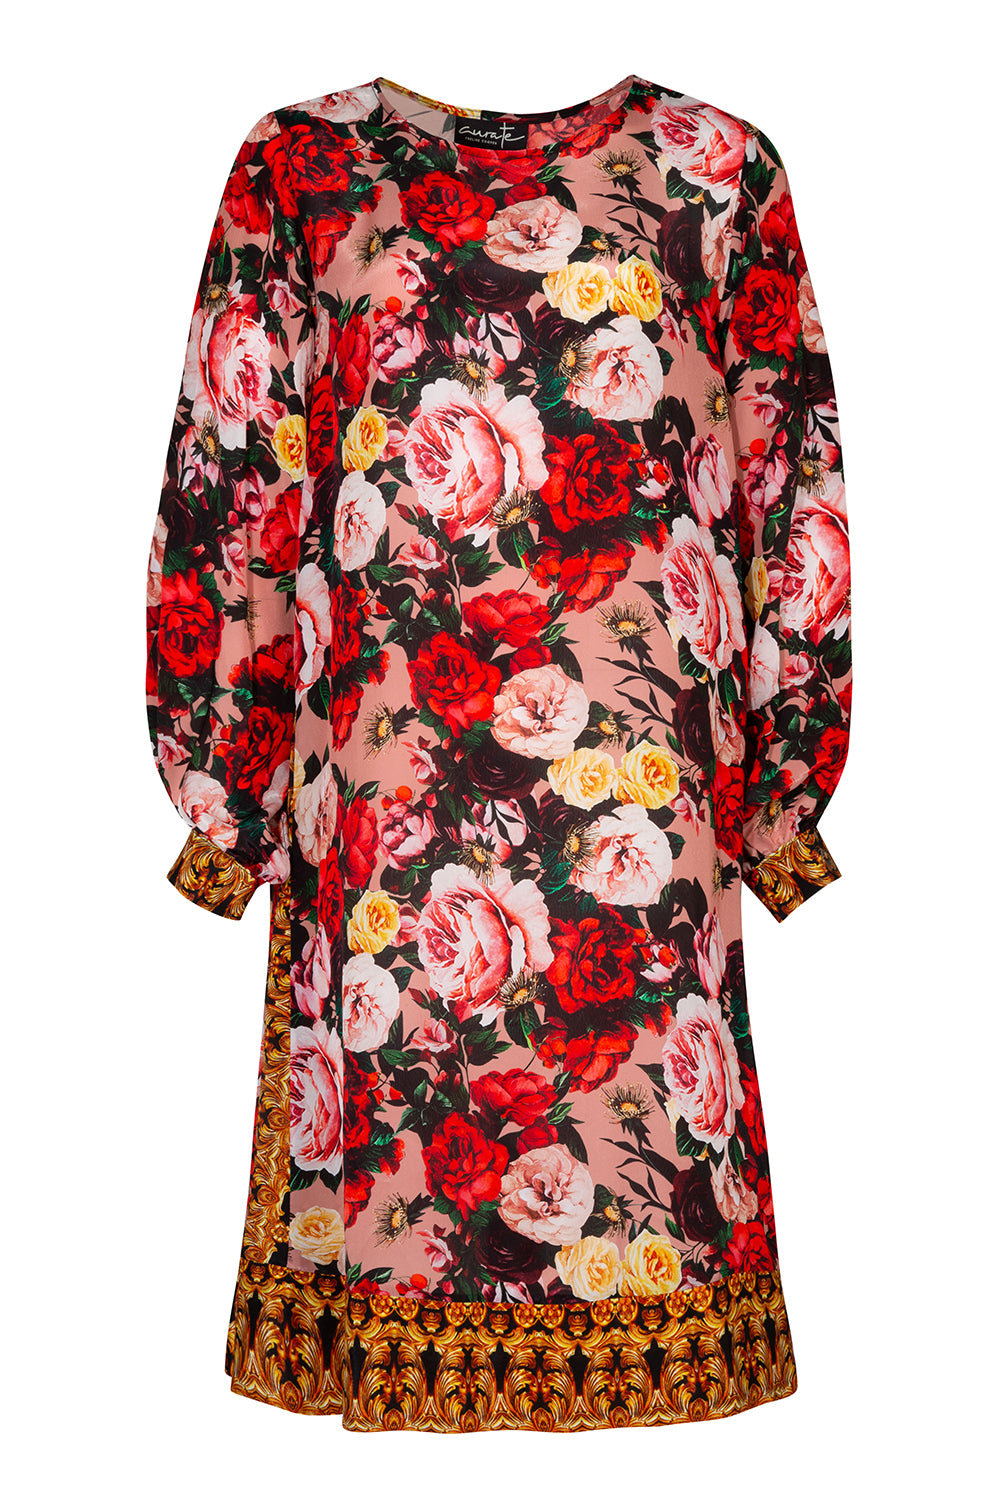 Curate Face The Tunic Dress Roses Pre-Order